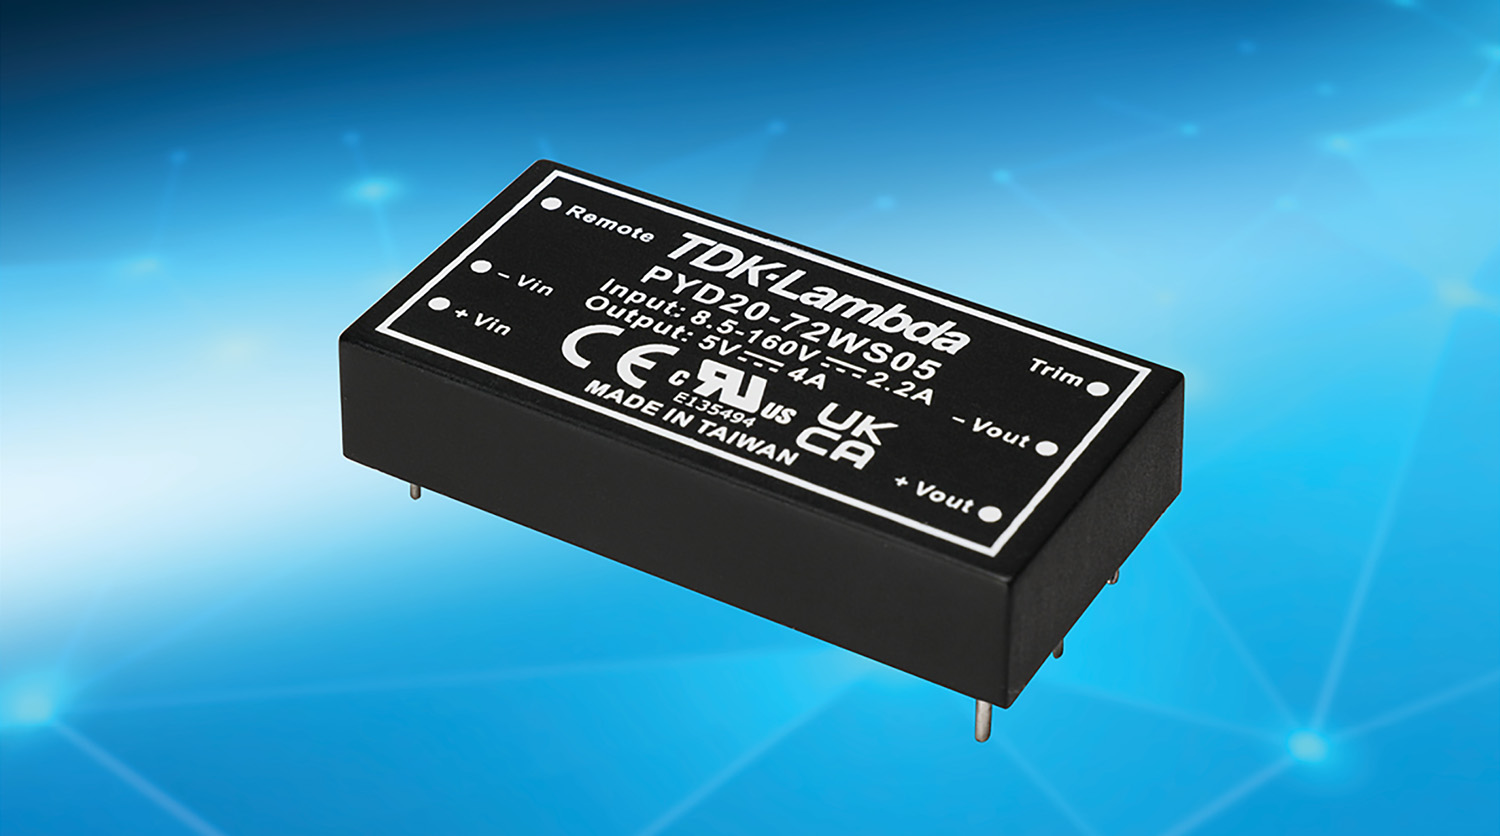 Rugged 20 W DC-DC converters with 18:1 ultra-wide input